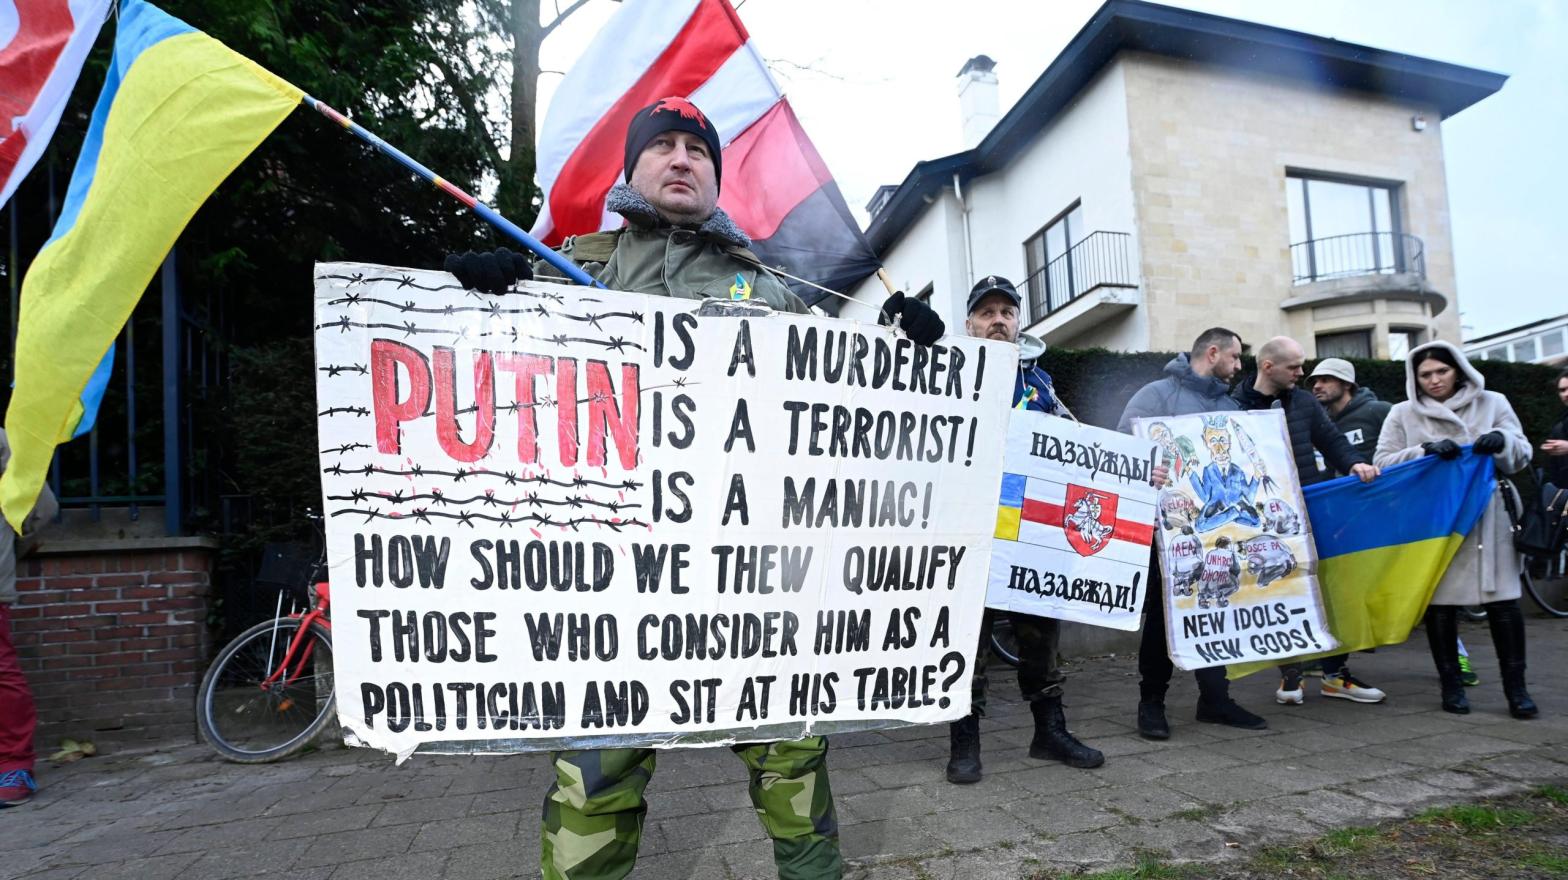 Peaceful Ukrainian protest at the Russian Consulate-General in Antwerp on February 25, 2022, in Antwerpen, Belgium, 25/02/2022  (Photo: Photonews, Getty Images)